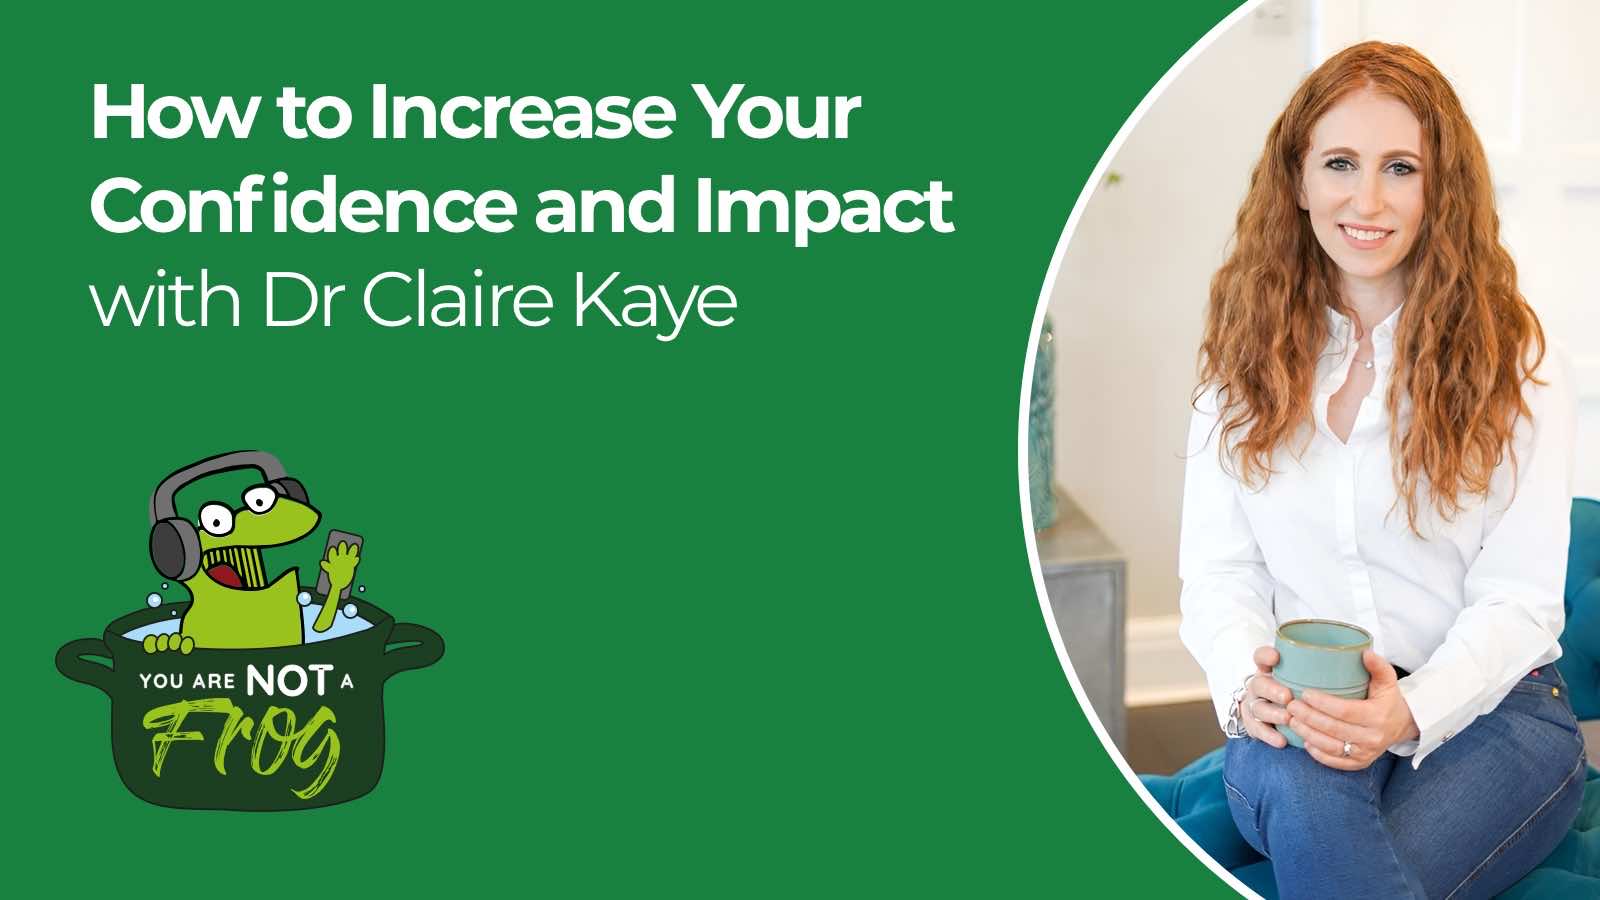 How to Increase Your Confidence and Impact